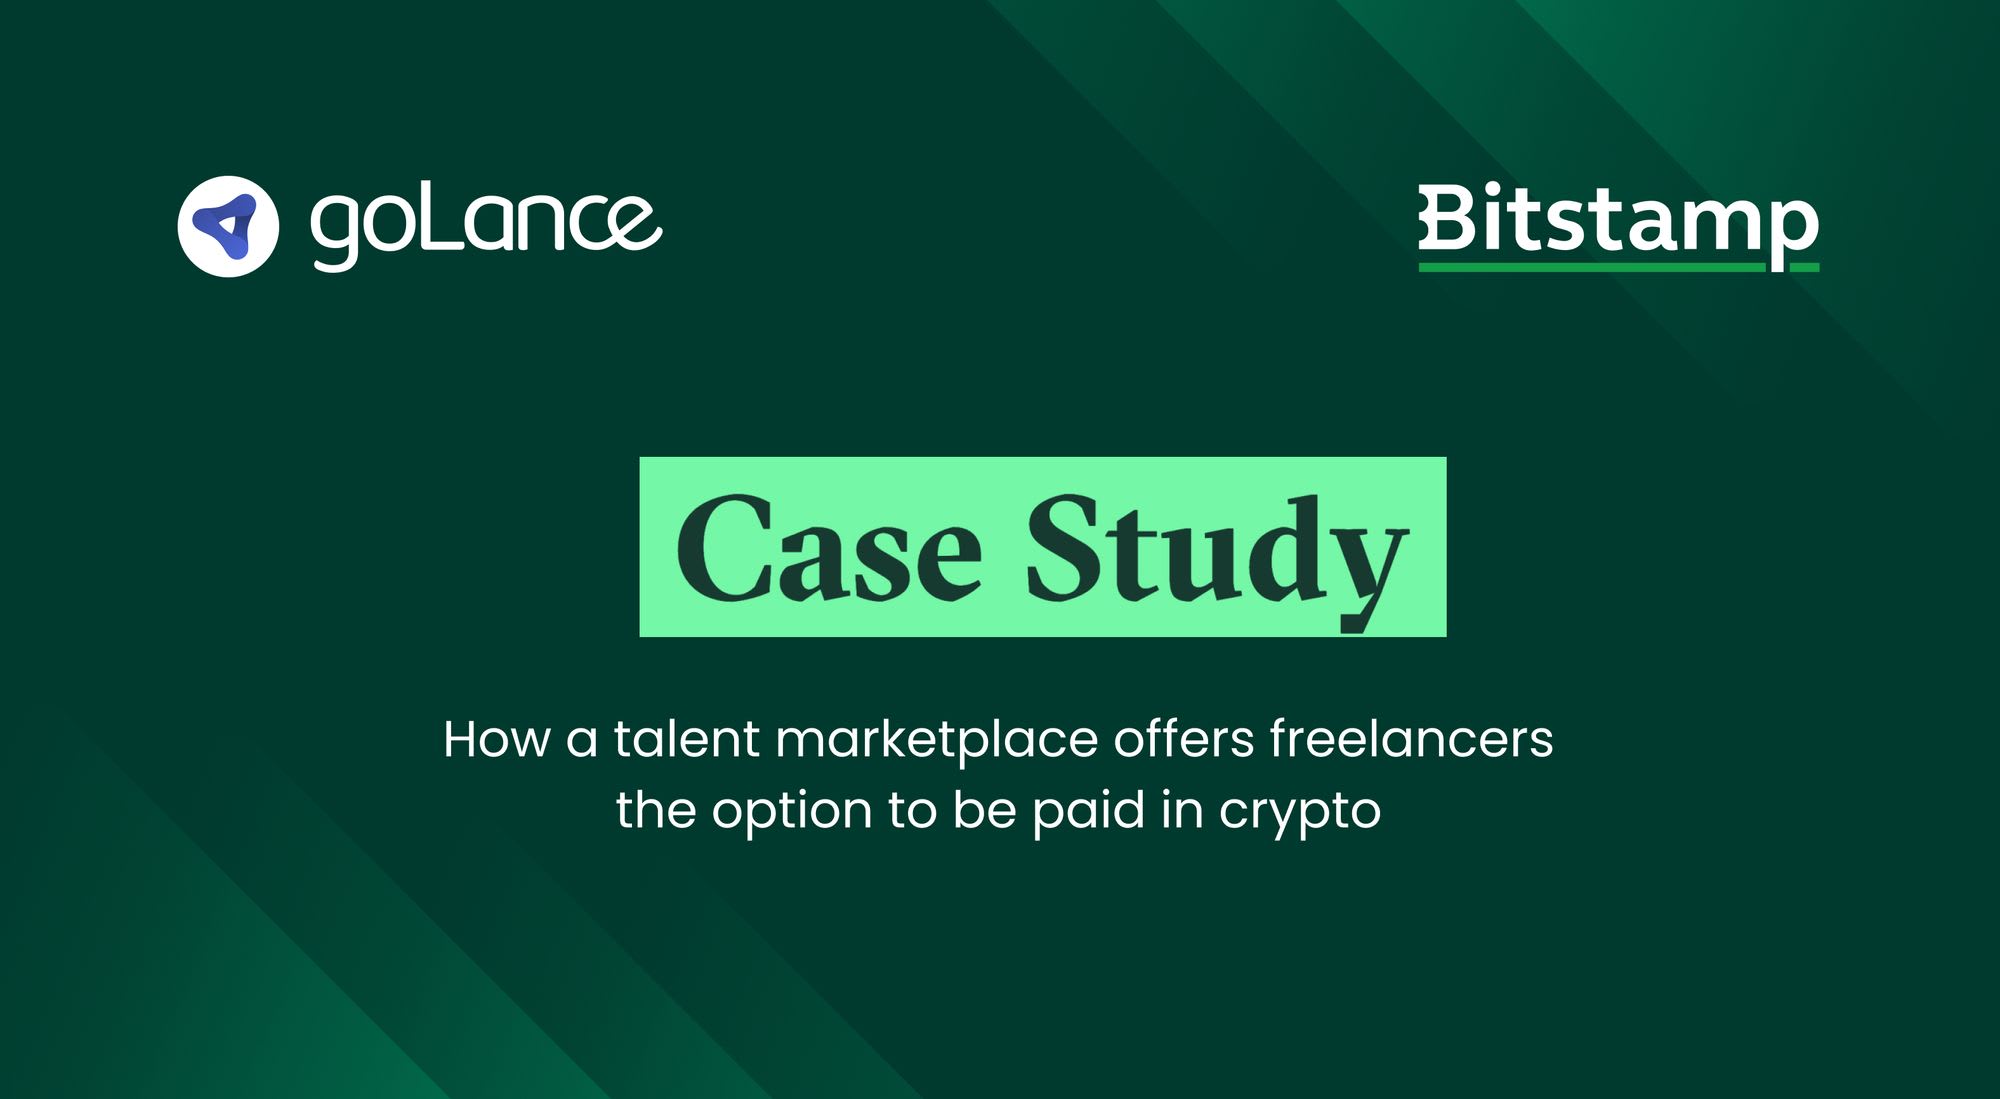 goLance featured in Bitstamp case study for bringing crypto payment options to freelancers